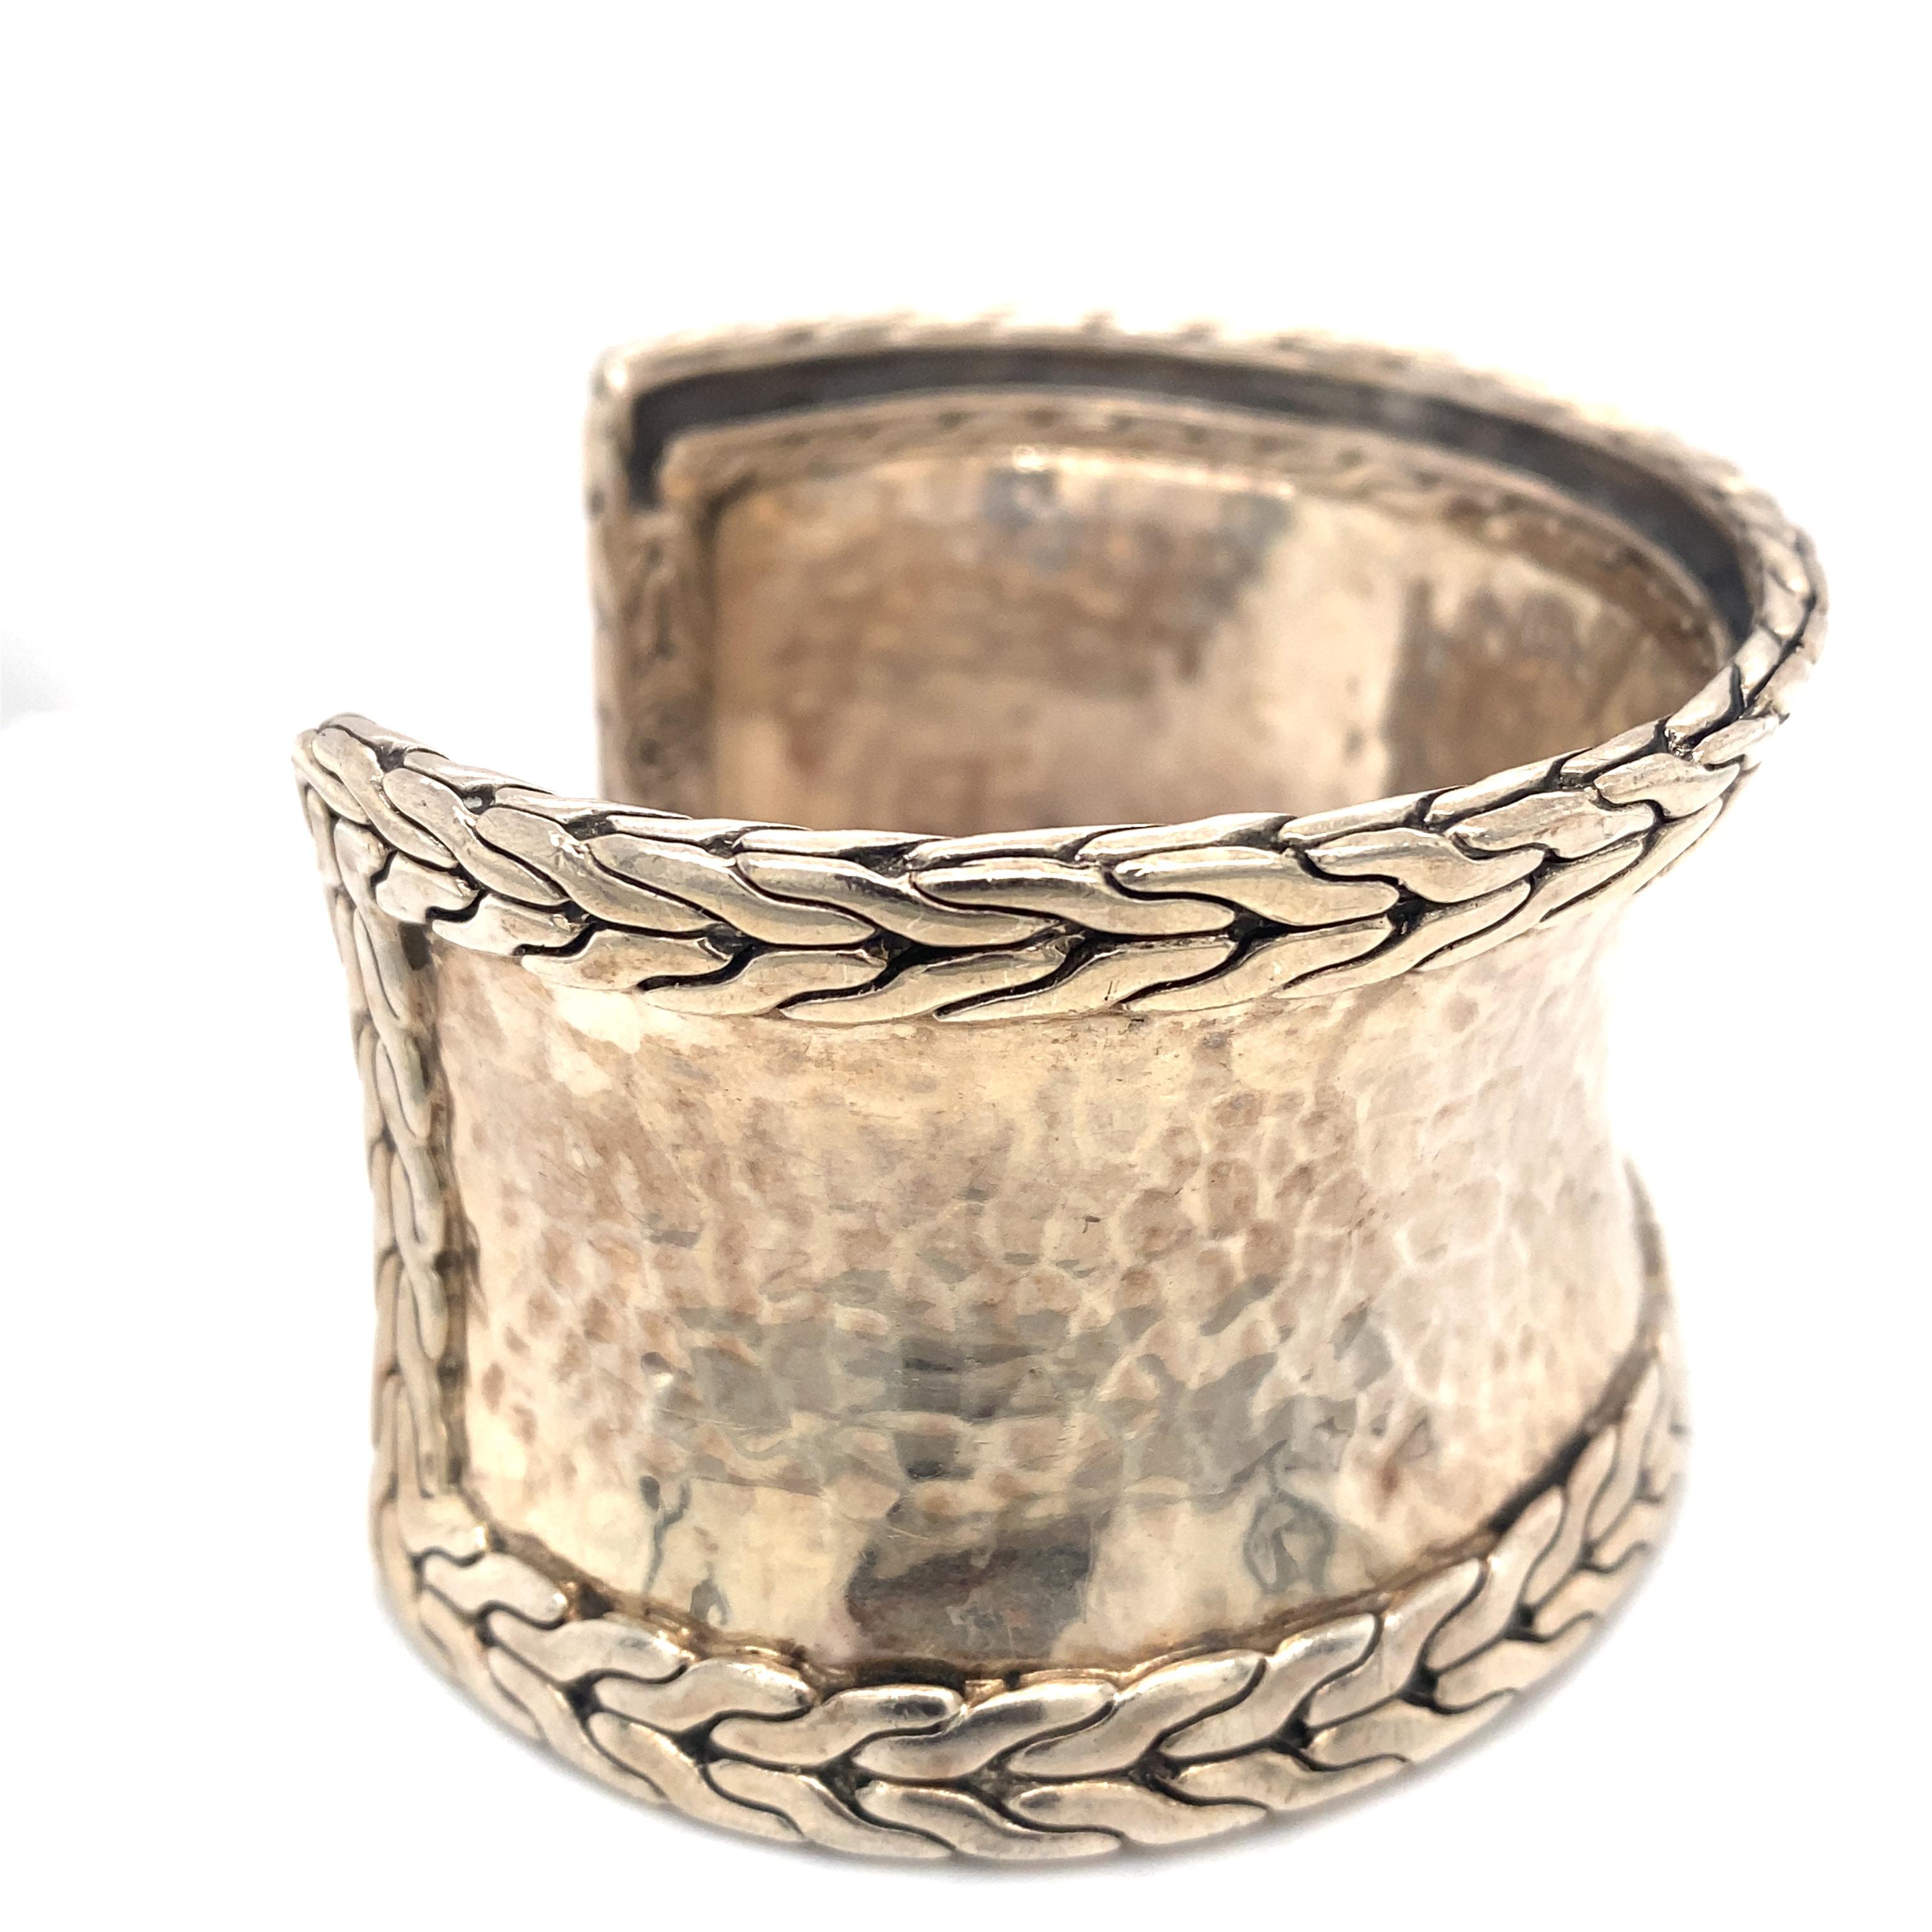 Item Details: This cuff bracelet by John Hardy has a detailed border and a hammered design.

Metal Type: Sterling Silver
Weight: 67.4 grams 